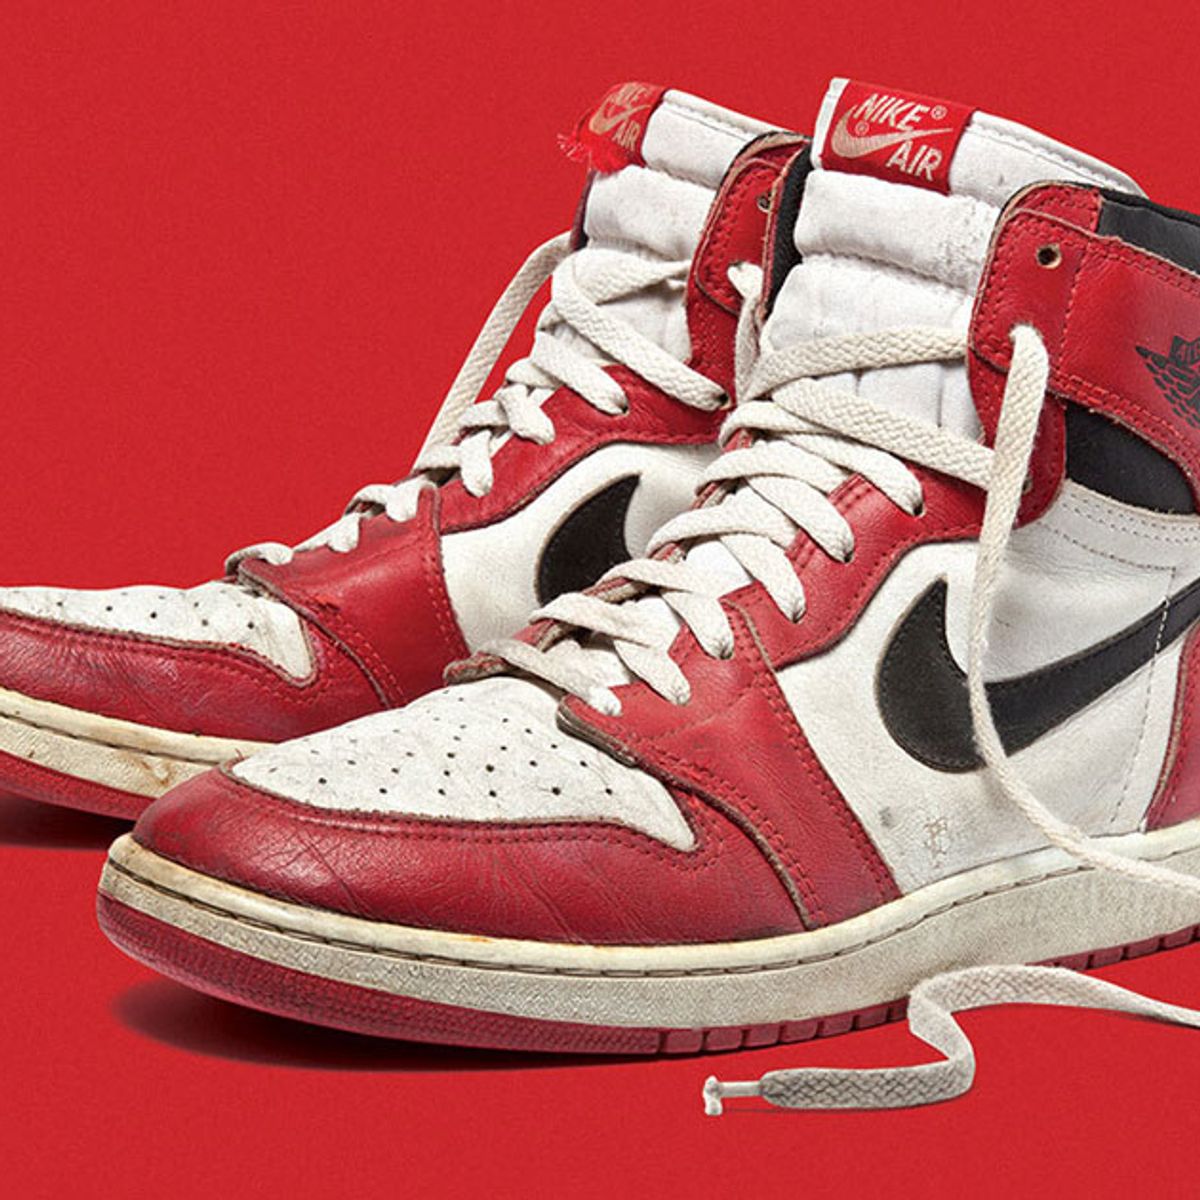 the jordan 1 chicago is coming back later this year